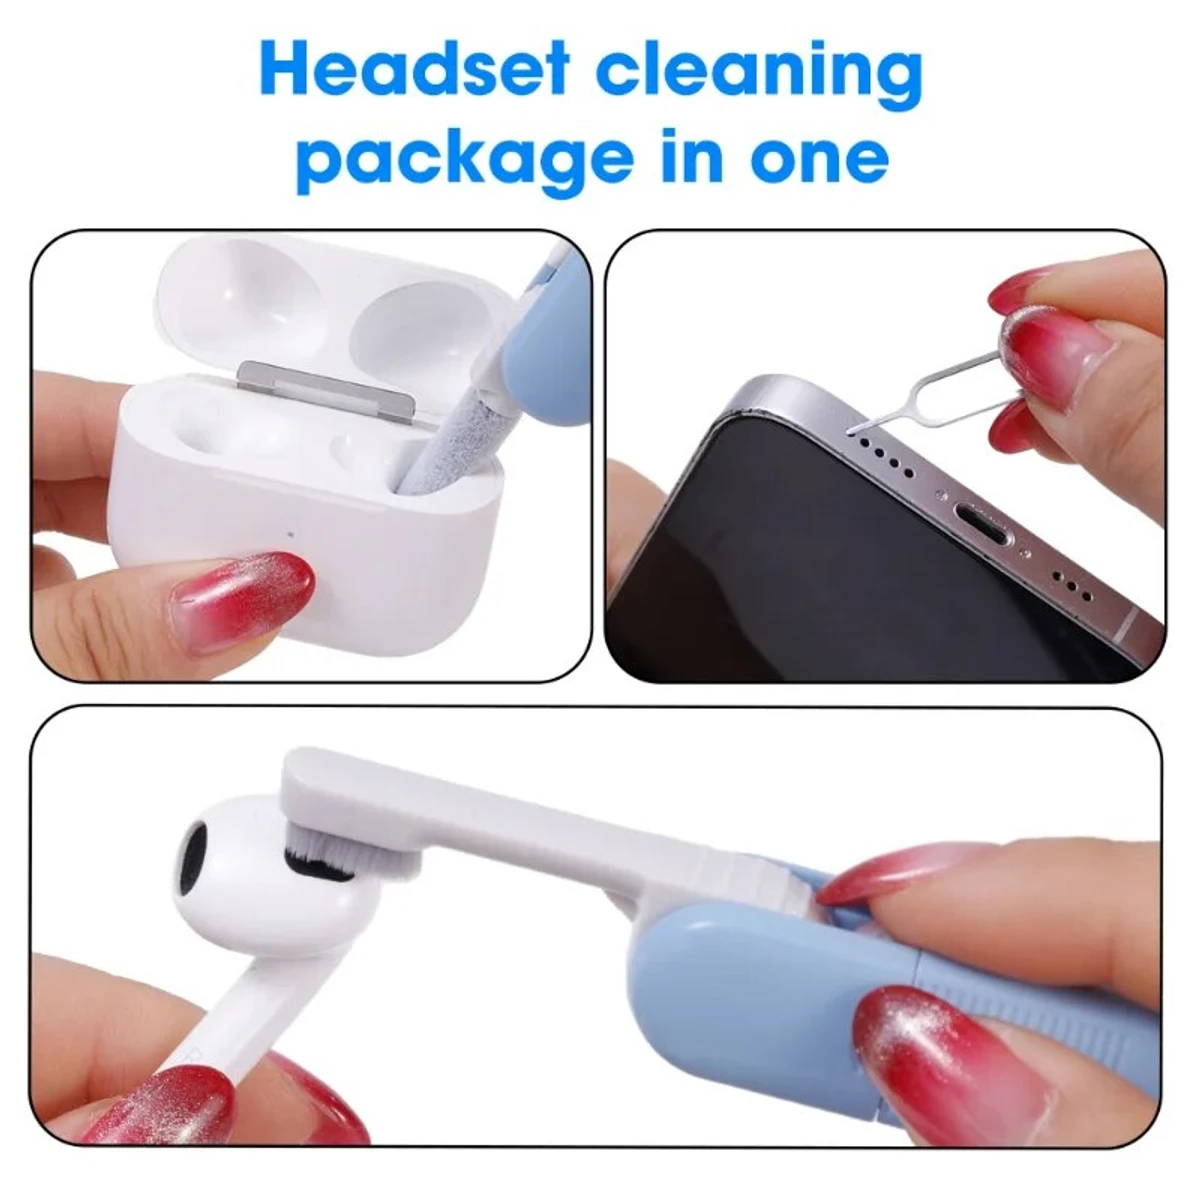 7-in-1 Electronic Cleaner Kit - Portable Cleaning for Airpods Laptop, Keyboard, with Cleaning Pen Brush Spray for Phone iPad  Computer Screen/Keyboard/Headphones/Bluetooth Earphones (Light Blue).